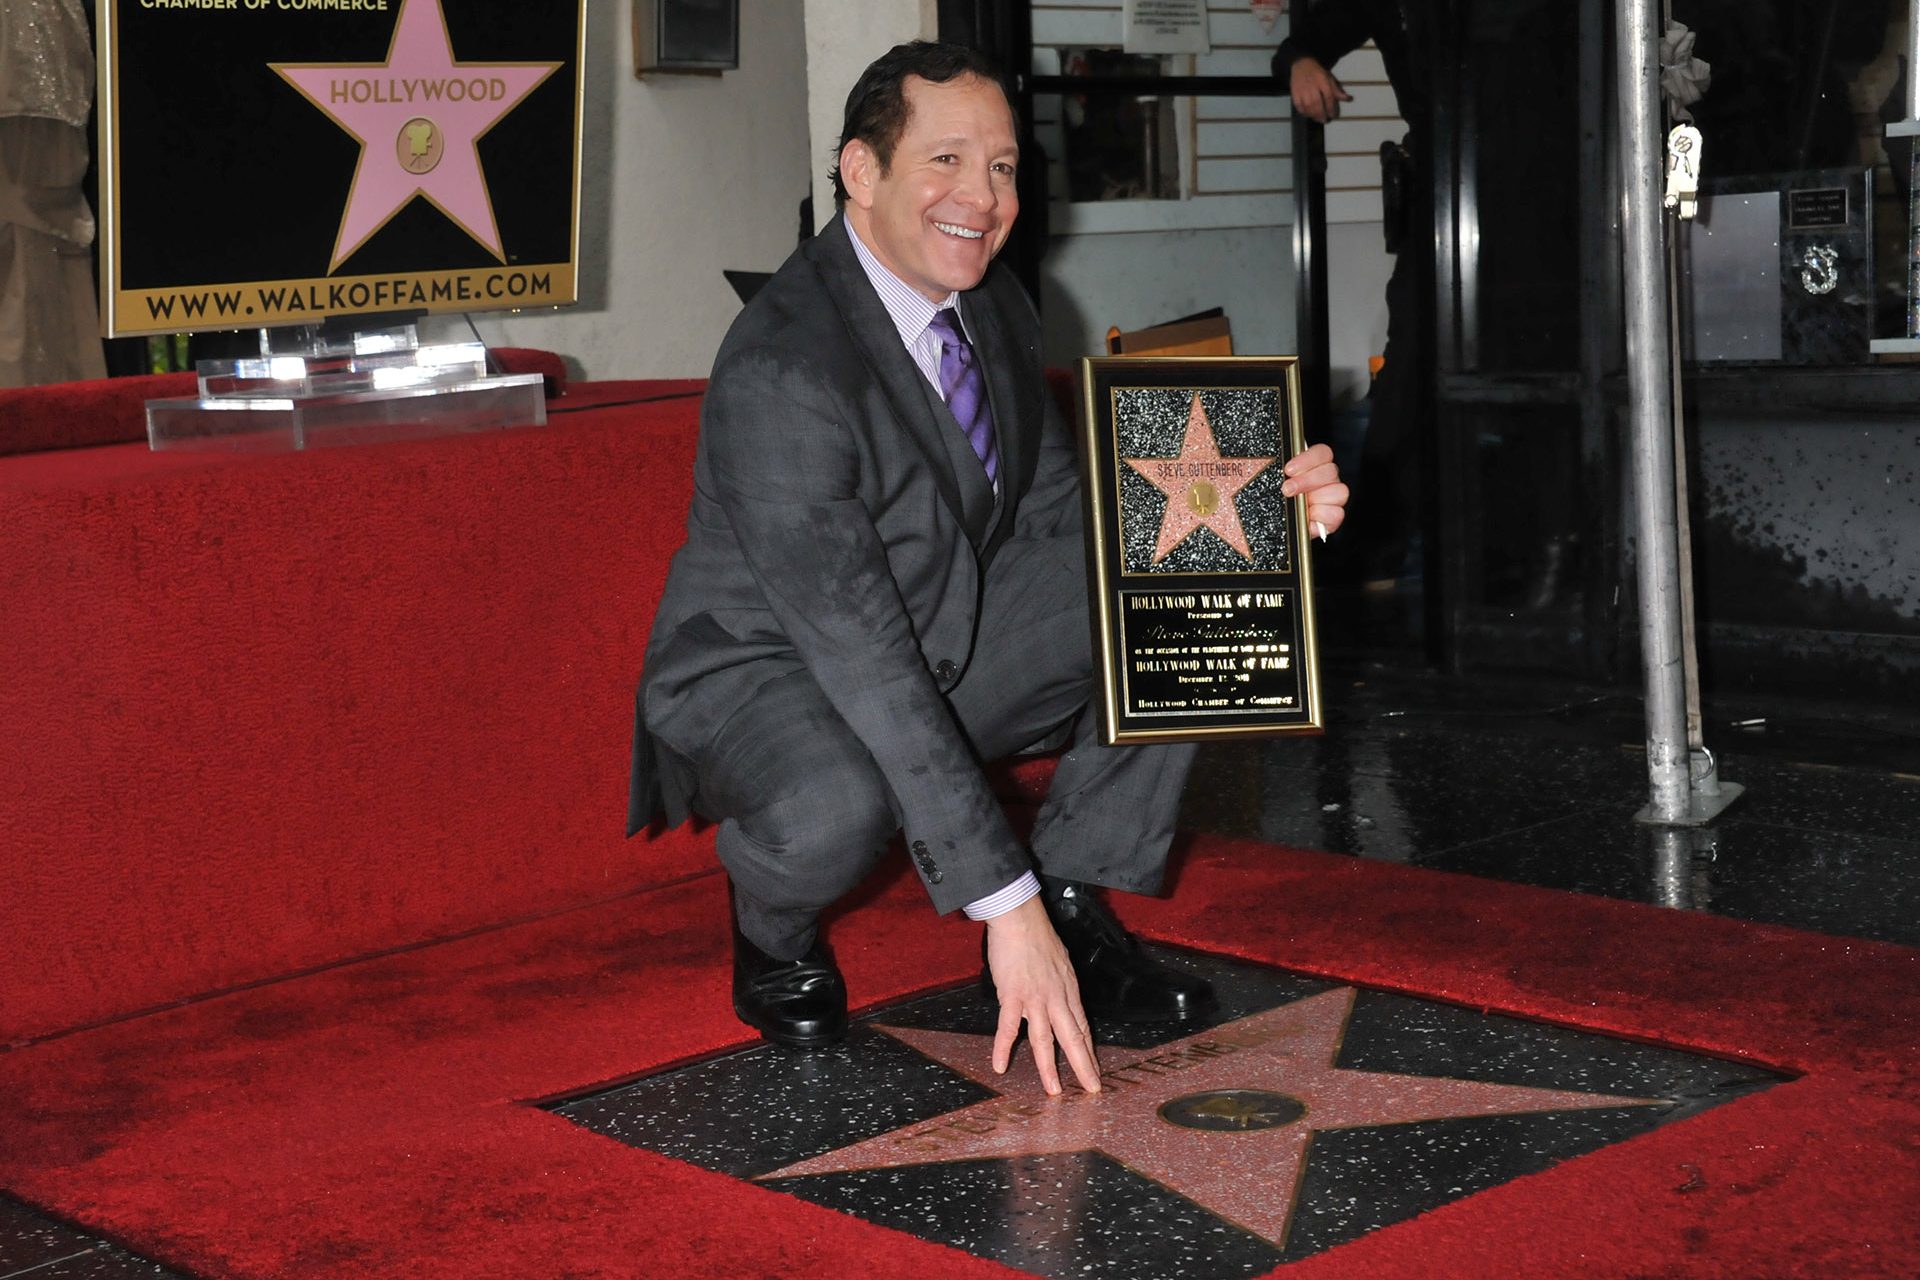 His Star on the Hollywood Walk of Fame